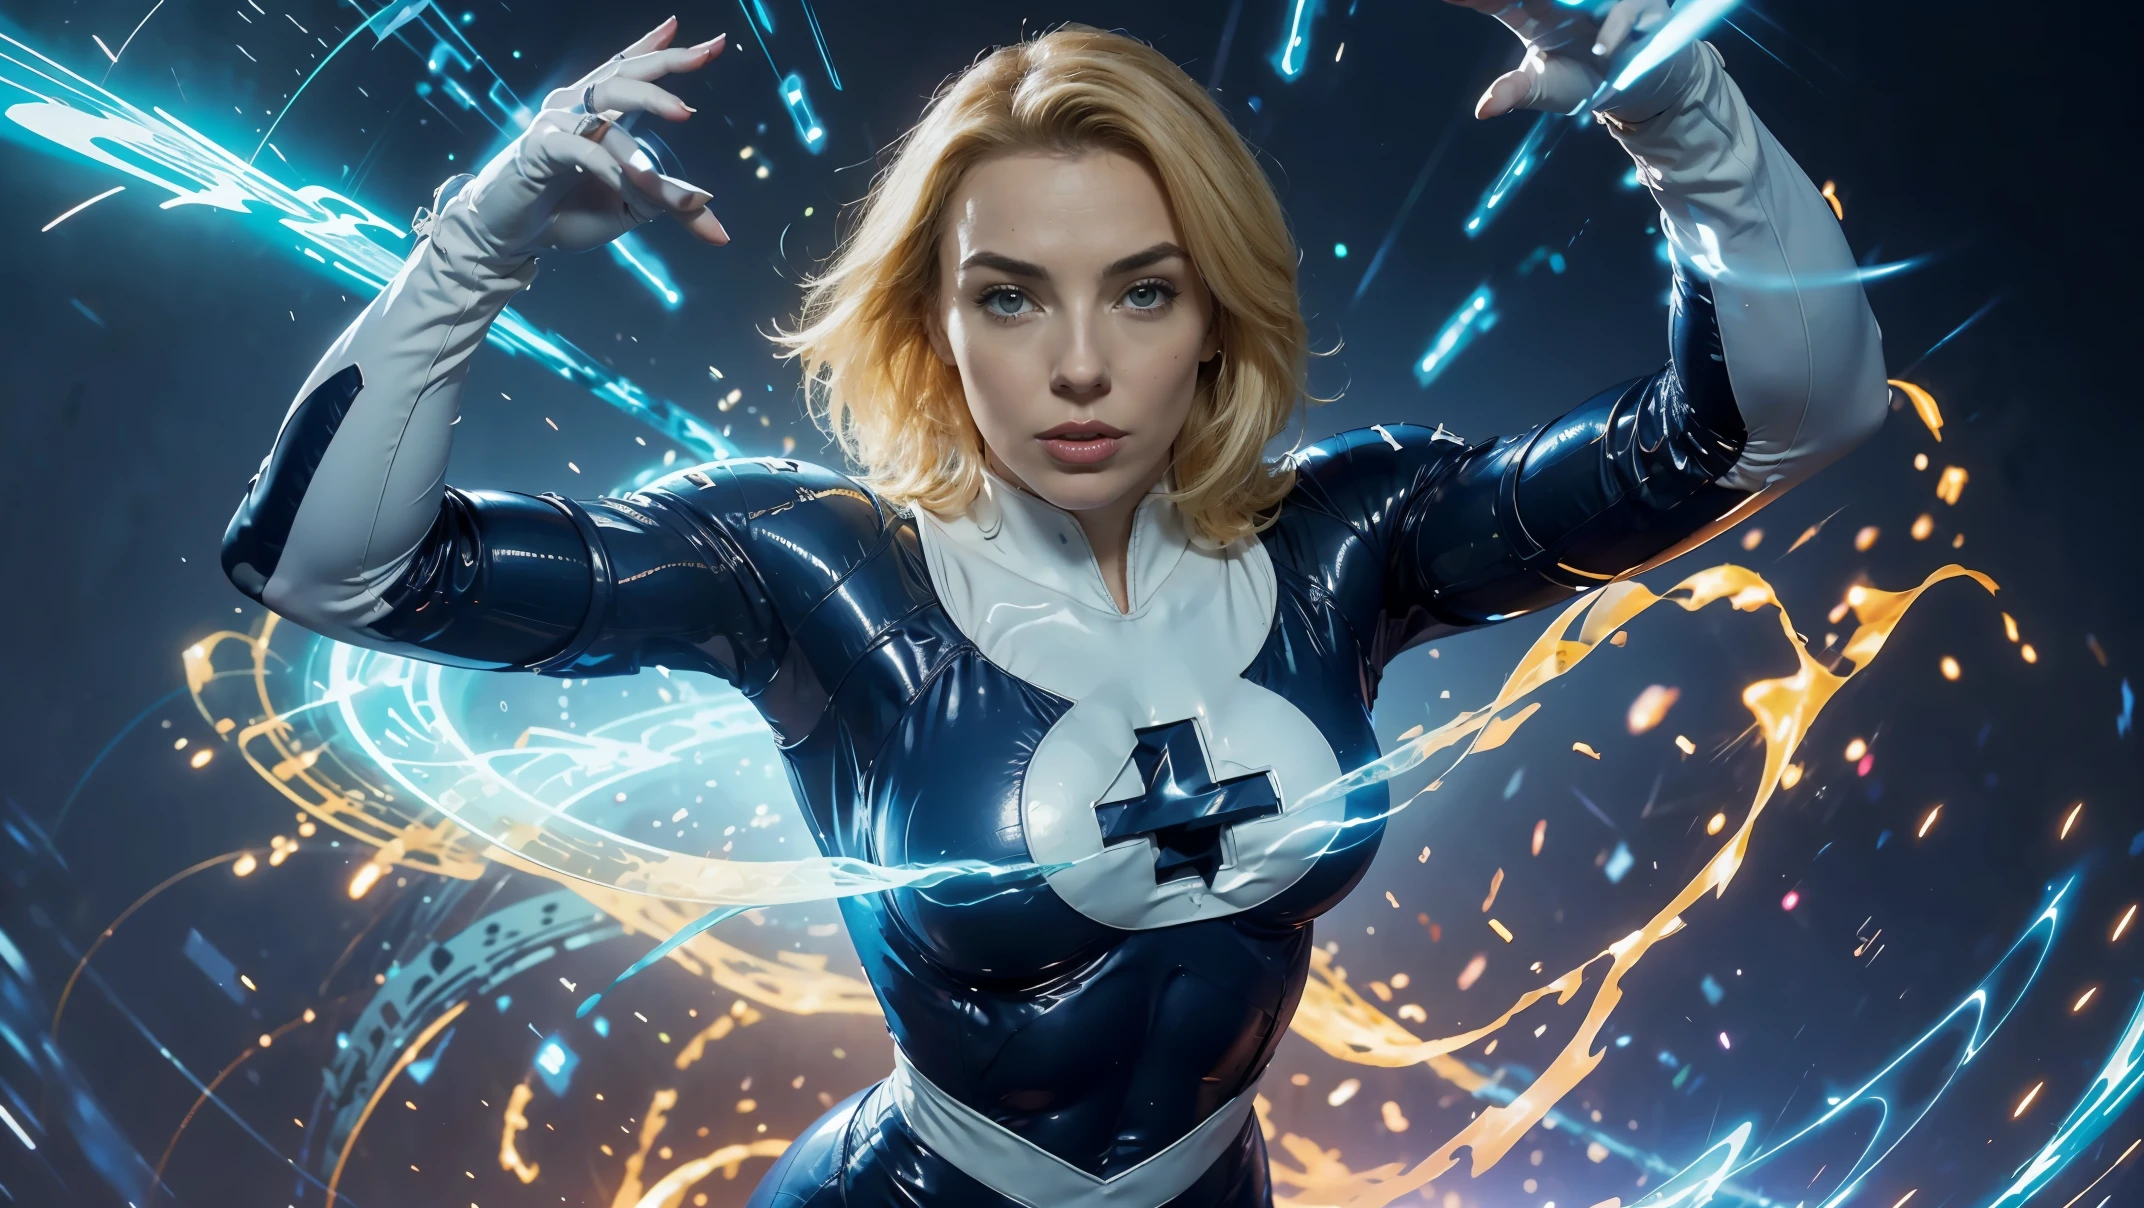 Jodie Comer is Sue Storm ,scan, mature, American , (extremely detailed 8k wallpaper CG unit: 1.1), (masterpiece :1.0), (big body muscular :1.1) , the iconic Fantastic Four suit, floating in mid-air. Sue has an intense and focused expression on her face, with her (blonde platinum hair long wild :1.4). She is wearing her trademark blue and white bodysuit, and her figure is emphasized with dynamic curves. The background scientific laboratory futuristic white, Overall, the image should capture the essence of Sue Storm's power, strength, and beauty in a stunning and awe-inspiring way, using use your white magic barrier on her , masterpiece :1.4 , pose .